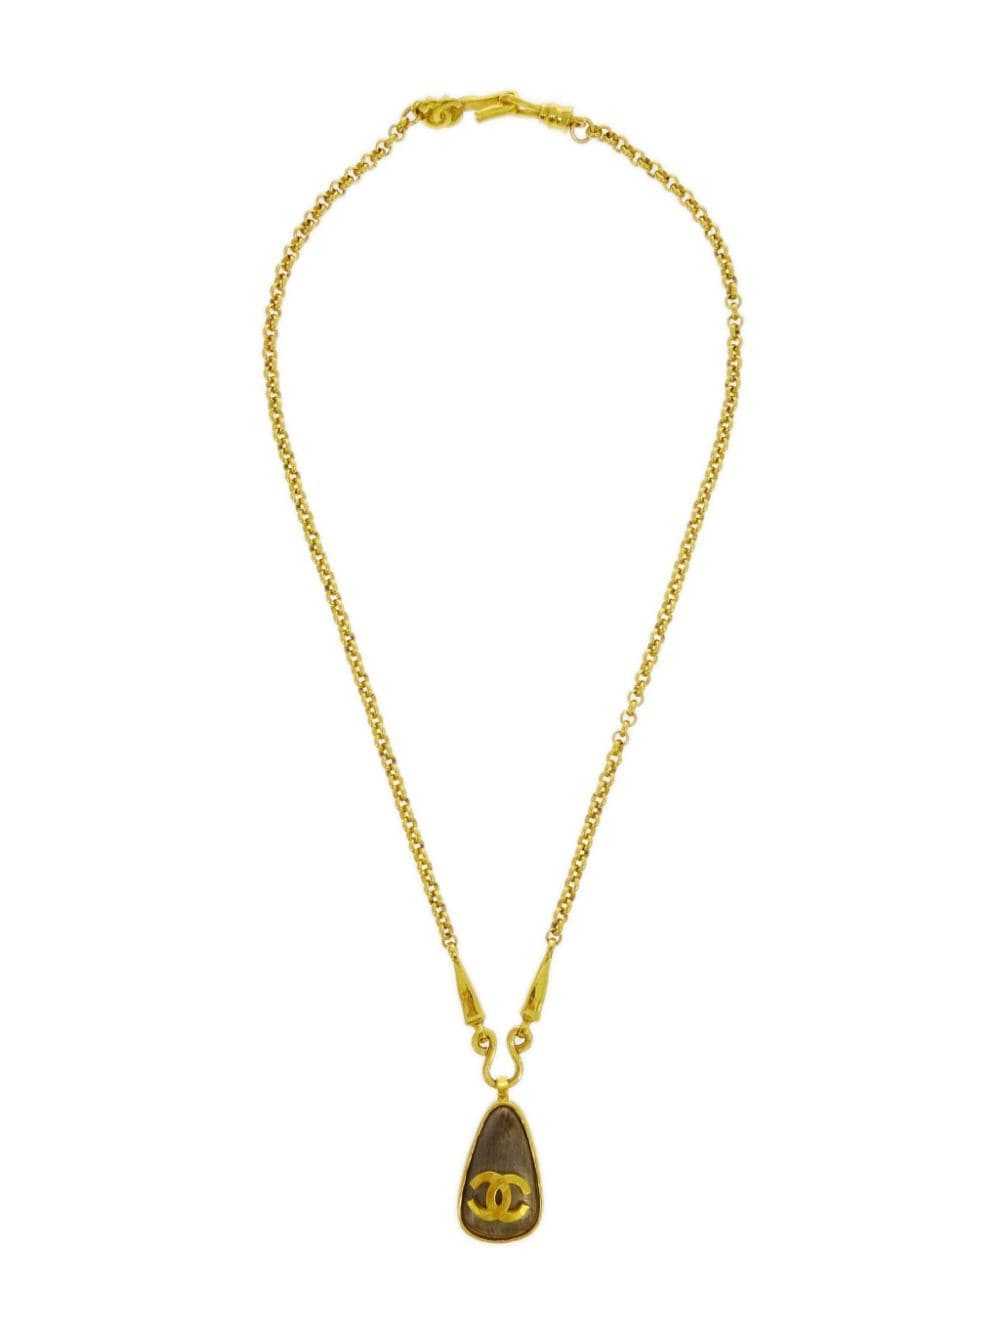 CHANEL Pre-Owned 1997 CC pendant necklace - Gold - image 2